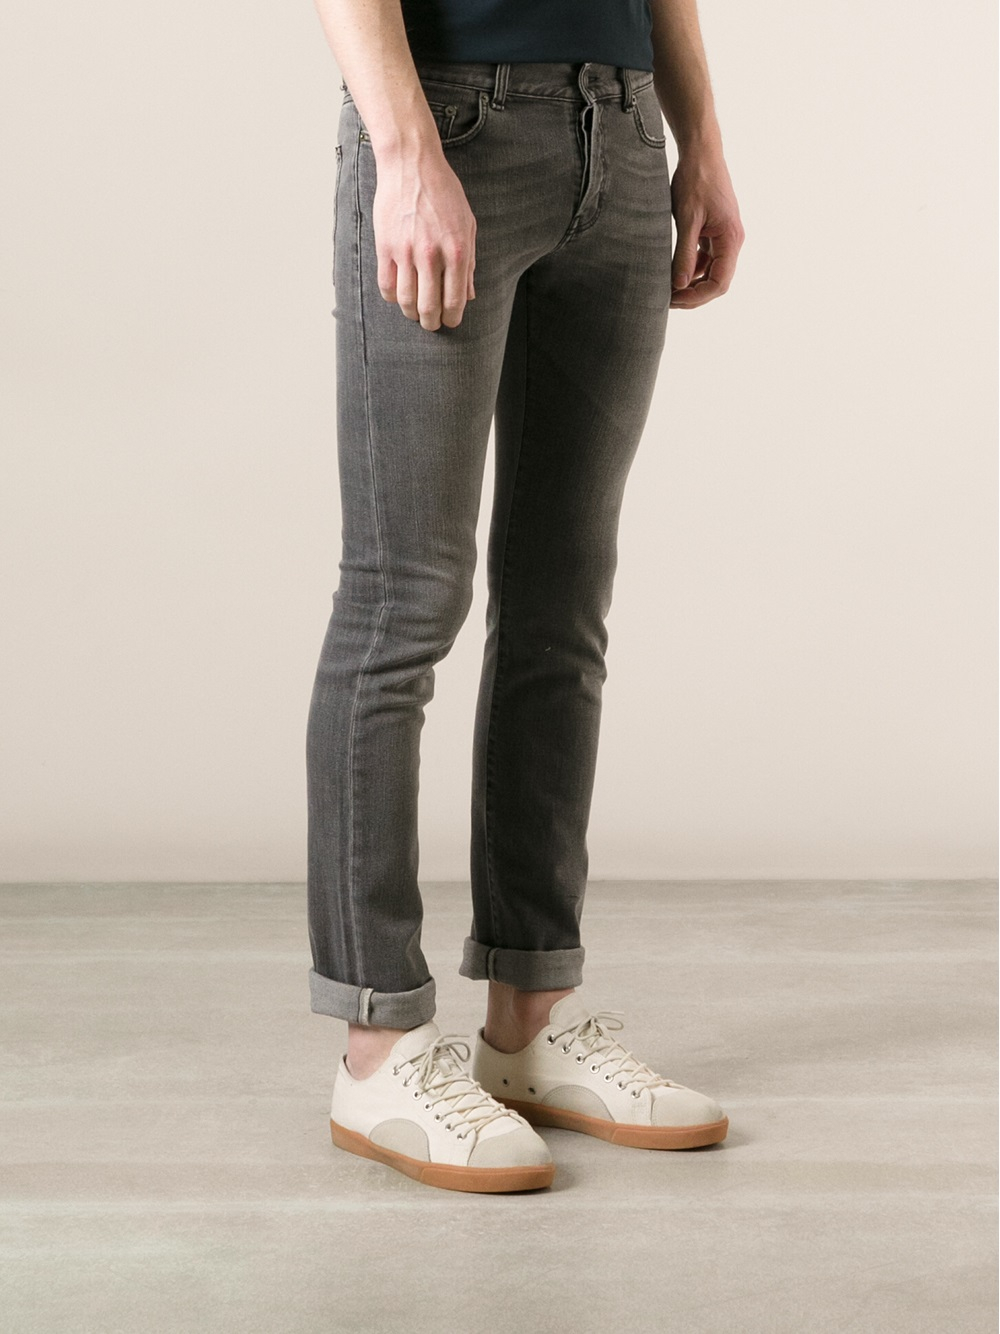 Saint Laurent Stone Washed Jeans in Grey (Gray) for Men - Lyst